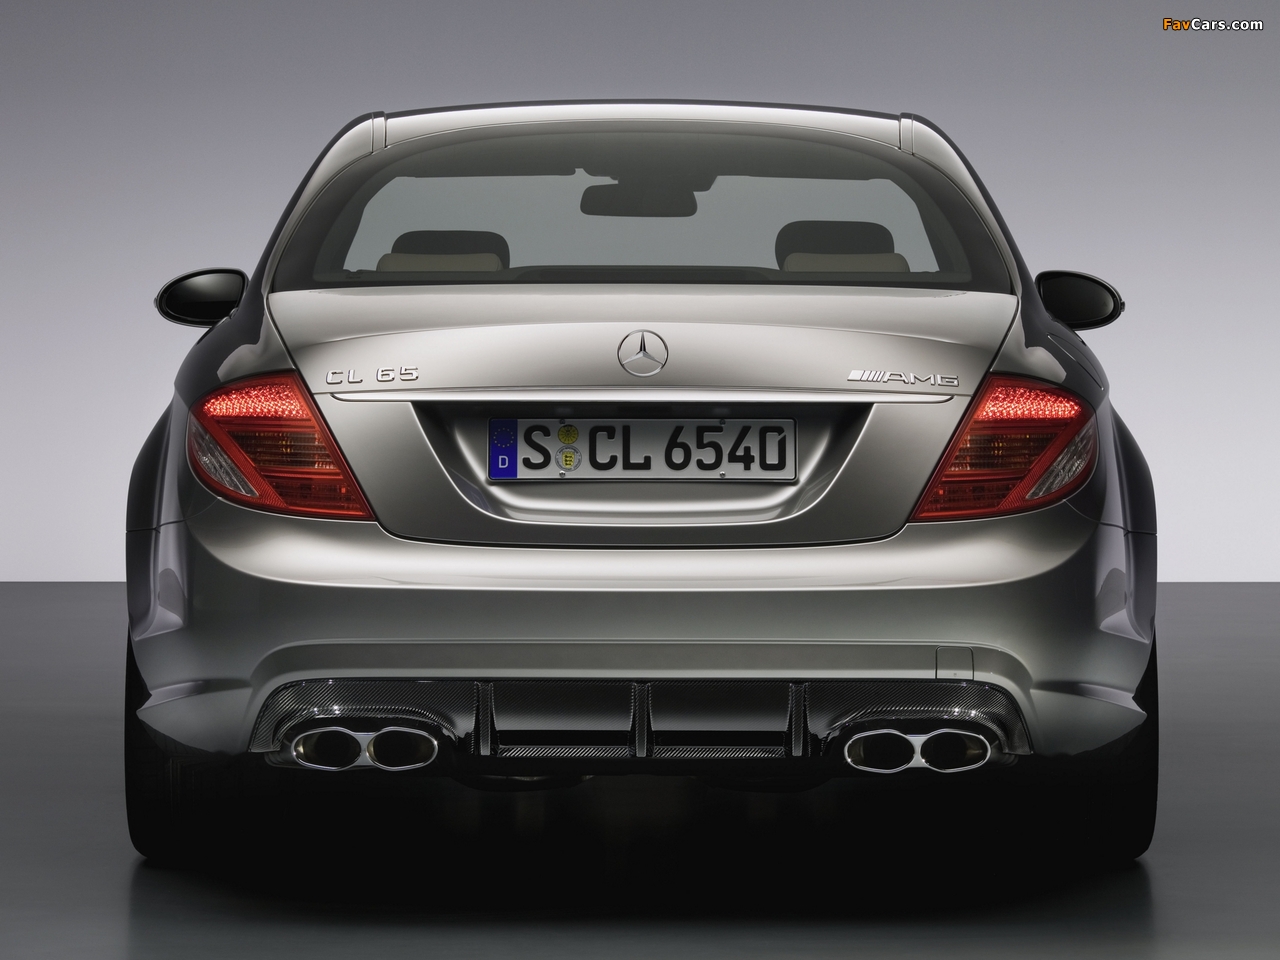 Mercedes-Benz CL 65 AMG 40th Anniversary (C216) 2007 images (1280 x 960)